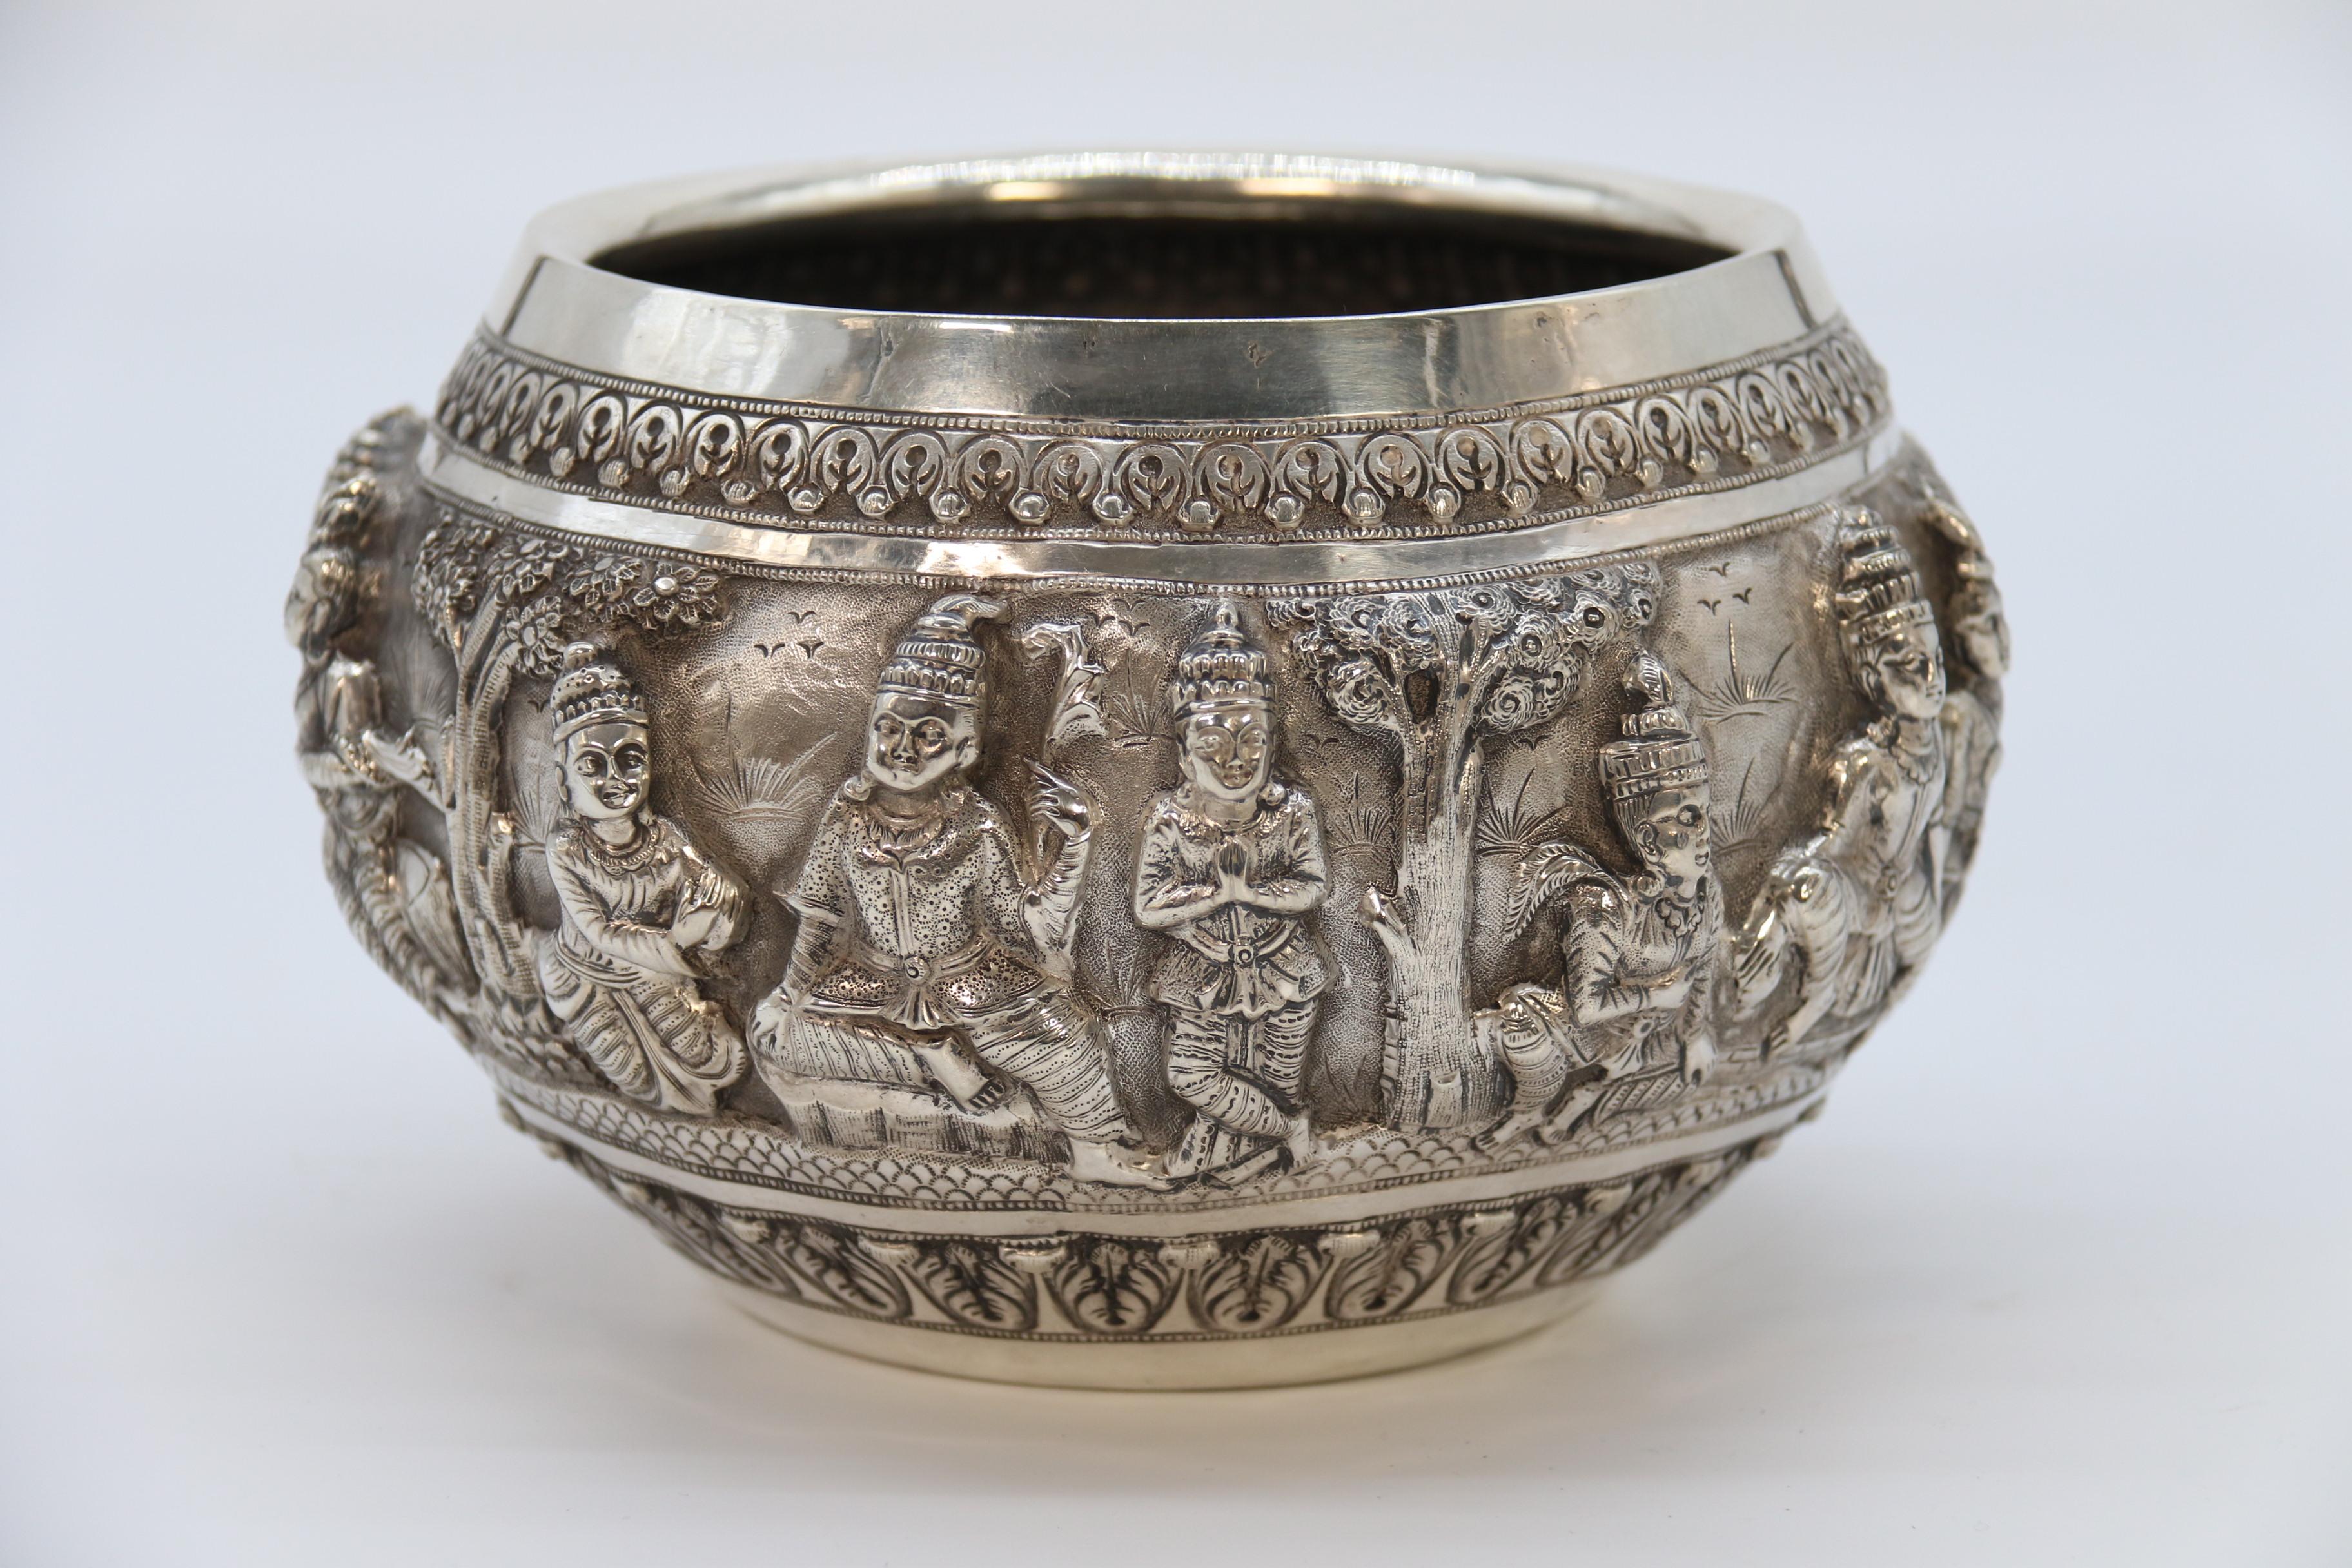 19th century Indian silver Raj period deep relief repousse work bowl circa 1870 In Good Condition For Sale In Central England, GB